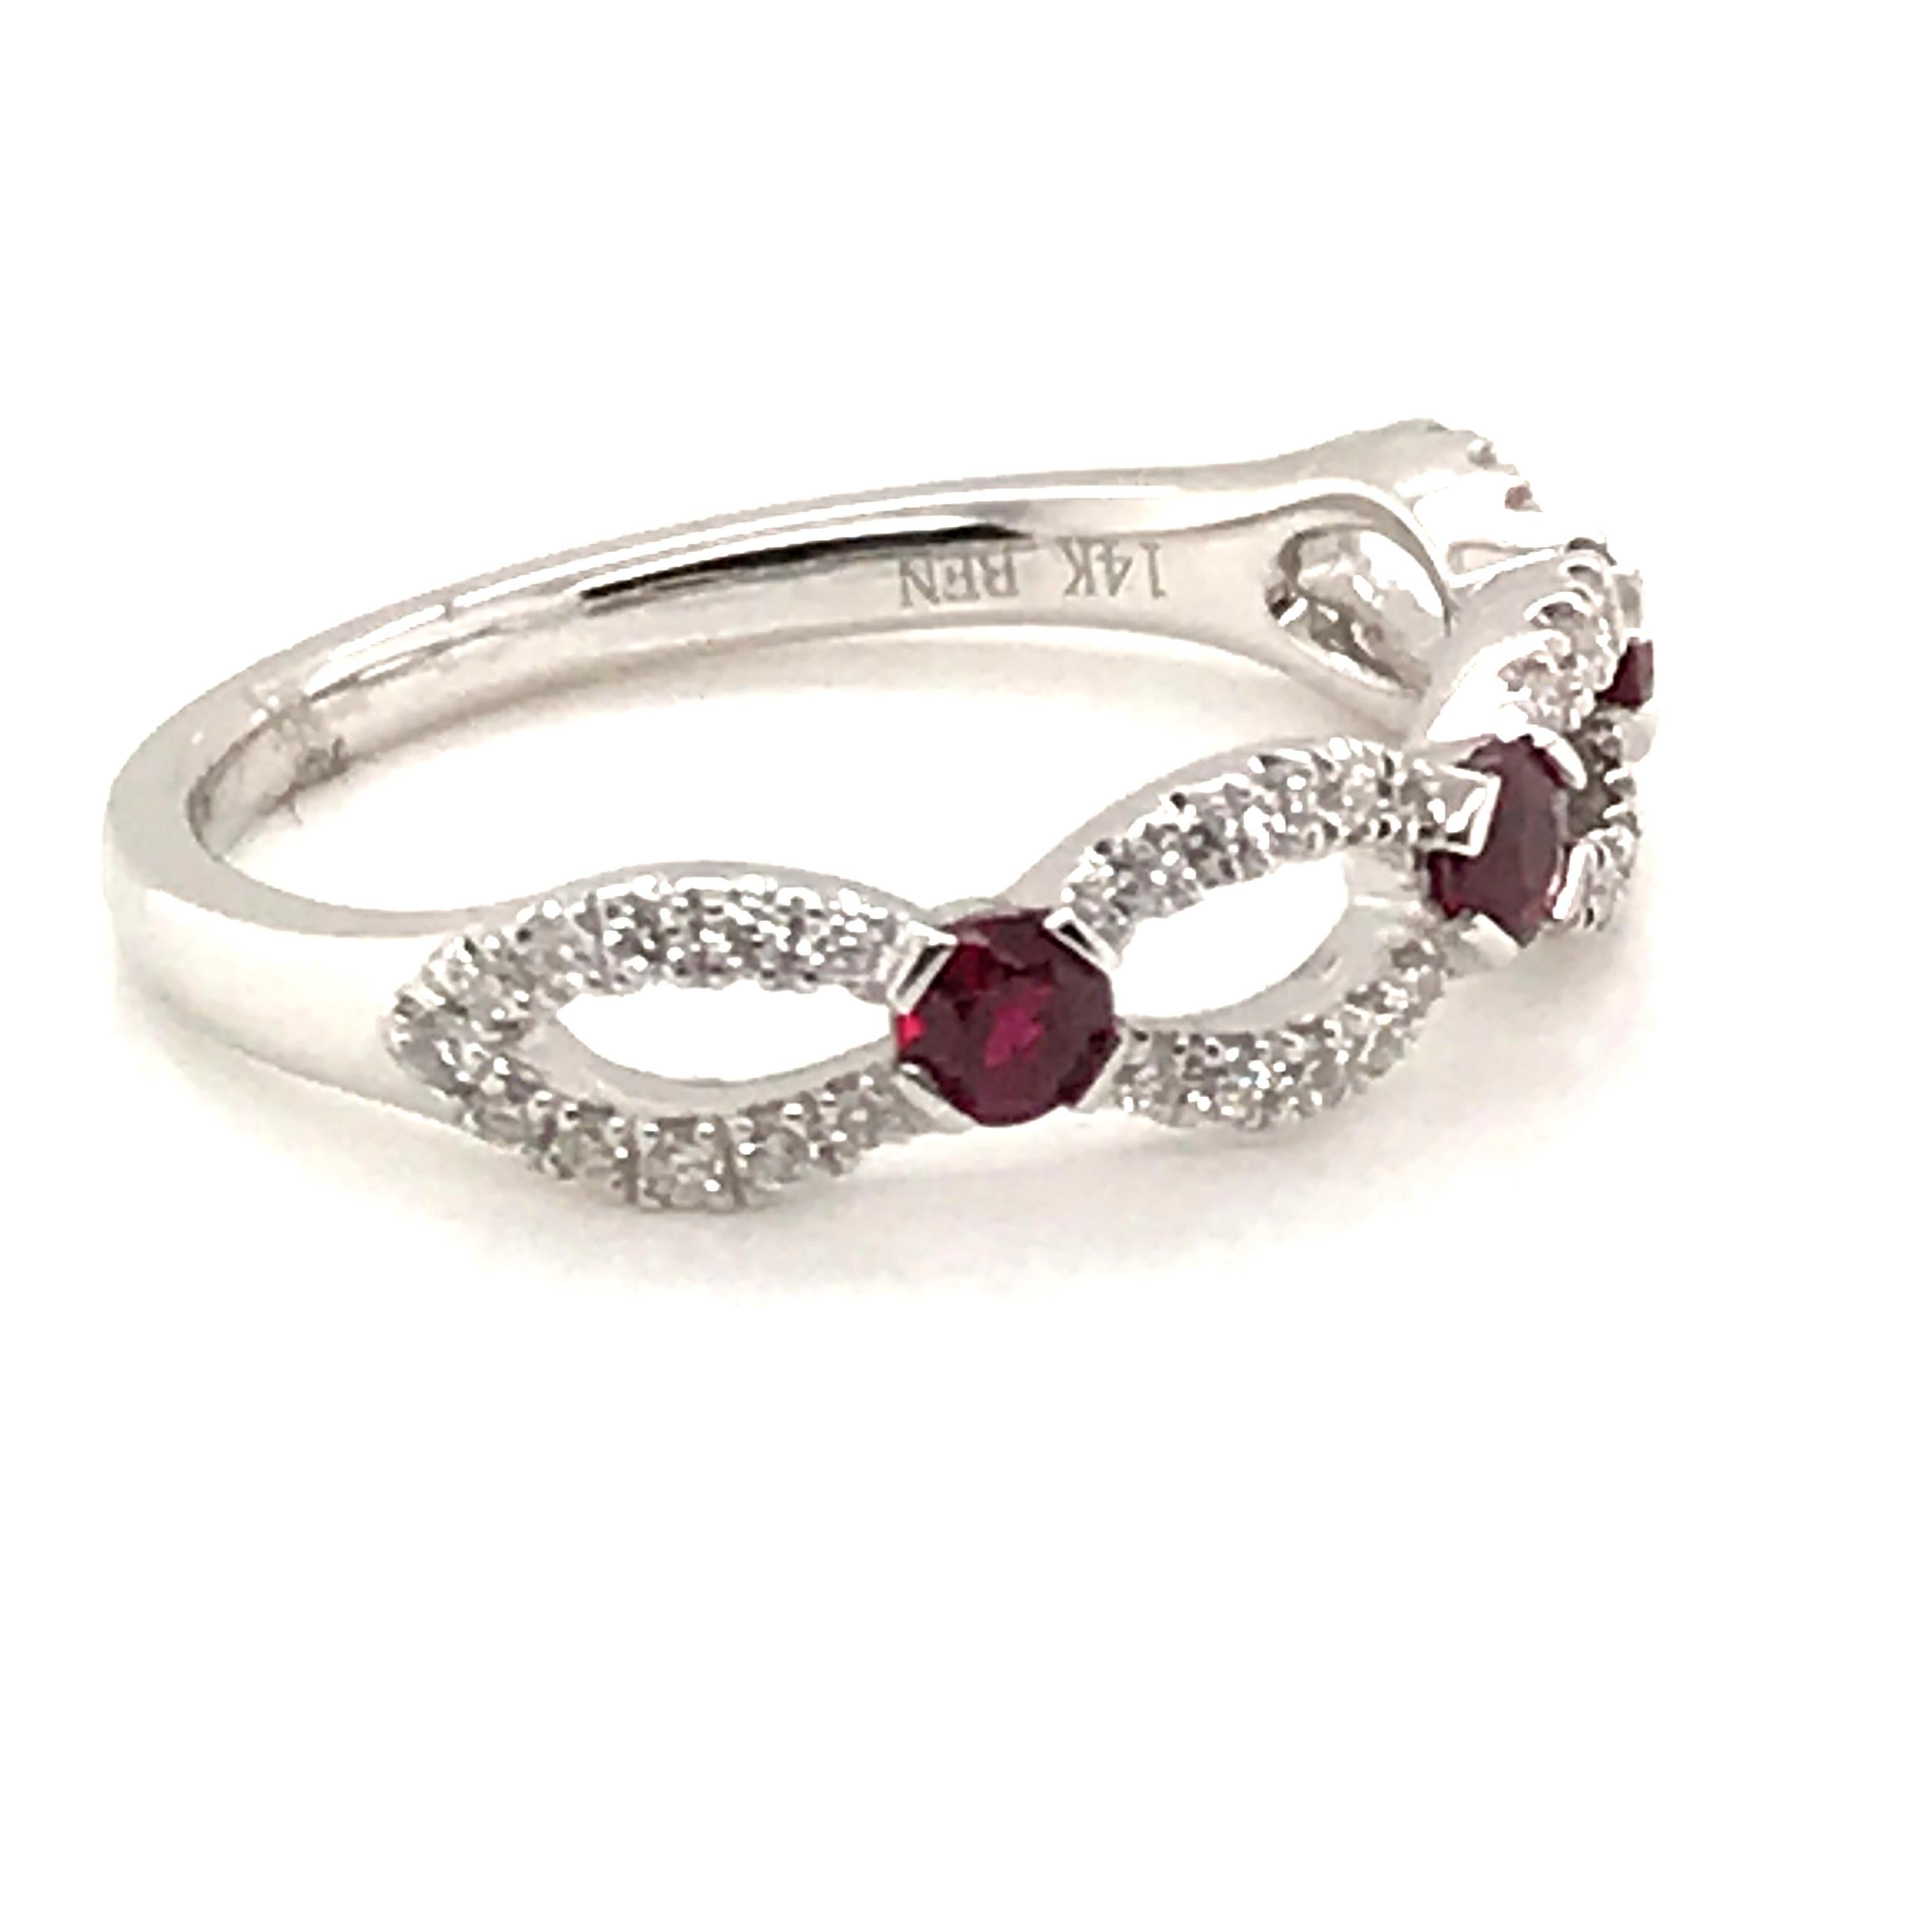 HJN Inc. Ring featuring a Natural Ruby and Diamond Fashion Band

Ruby Weight: 0.37 Carats 
Round-Cut Diamond Weight: 0.21 Carats 

Clarity Grade: SI1 
Color Grade: G
Polish and Symmetry: Very Good
Style Number: JA498RDWG